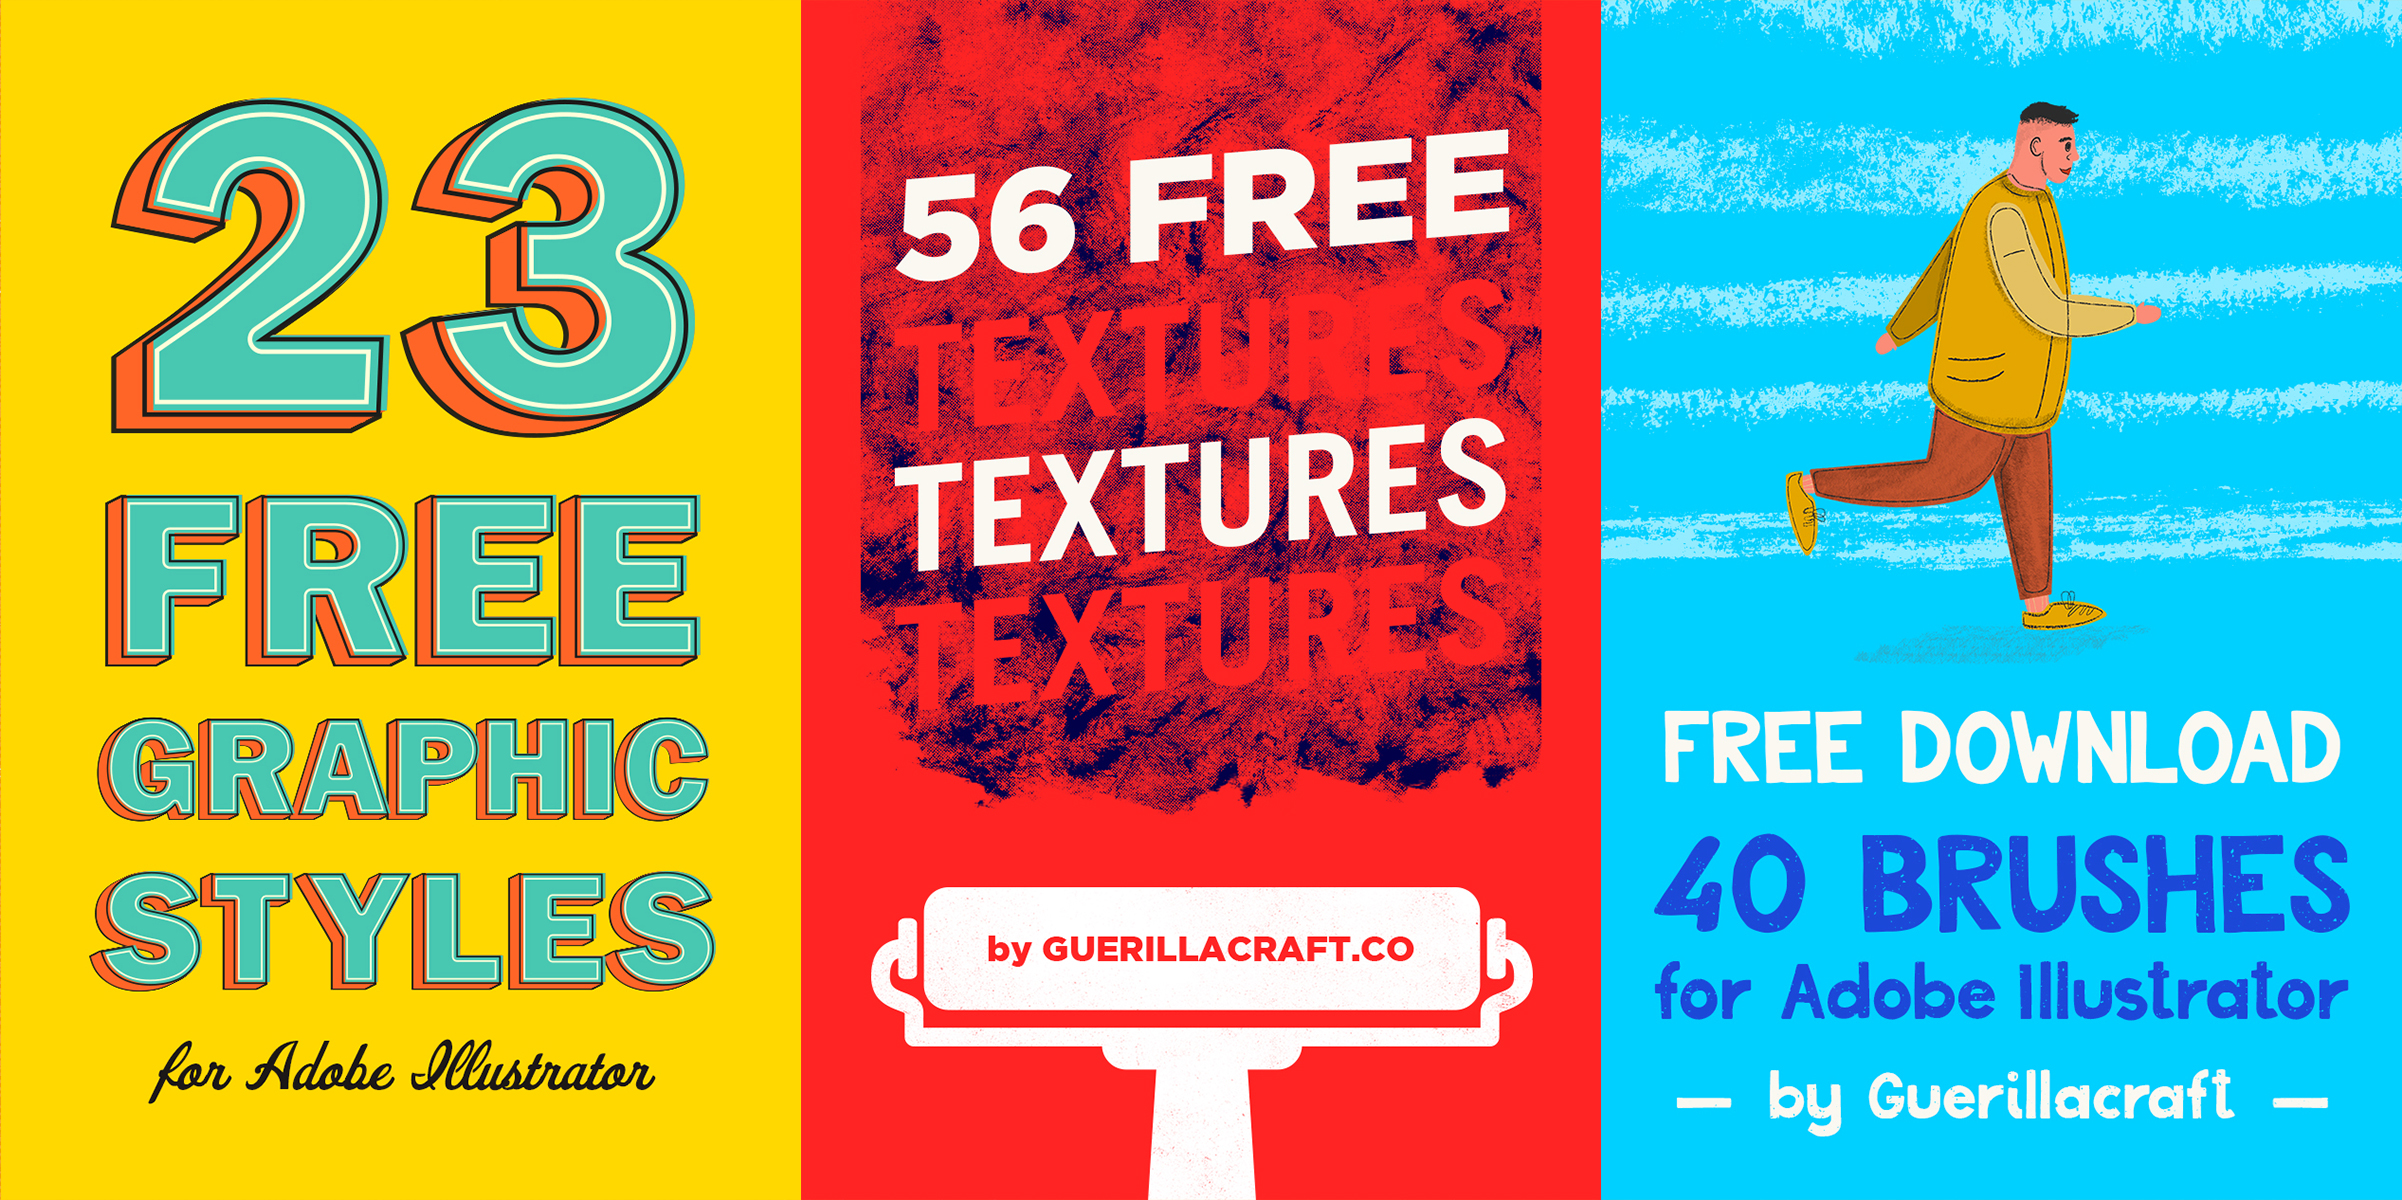 FREE DOWNLOAD of 23 Graphic styles, 56 textures and 41 brushes for Adobe Illustrator. Guerillacraft produces high-quality design resources and now offers the download of samples from premium products for FREE. With one click you will get access to Big Free Design Bundle containing 56 textures in EPS and PNG format, 41 brushes for Adobe Illustrator and 23 great graphics styles for Adobe Illustrator. Get them all without spending a cent! Just click on image and download them for FREE